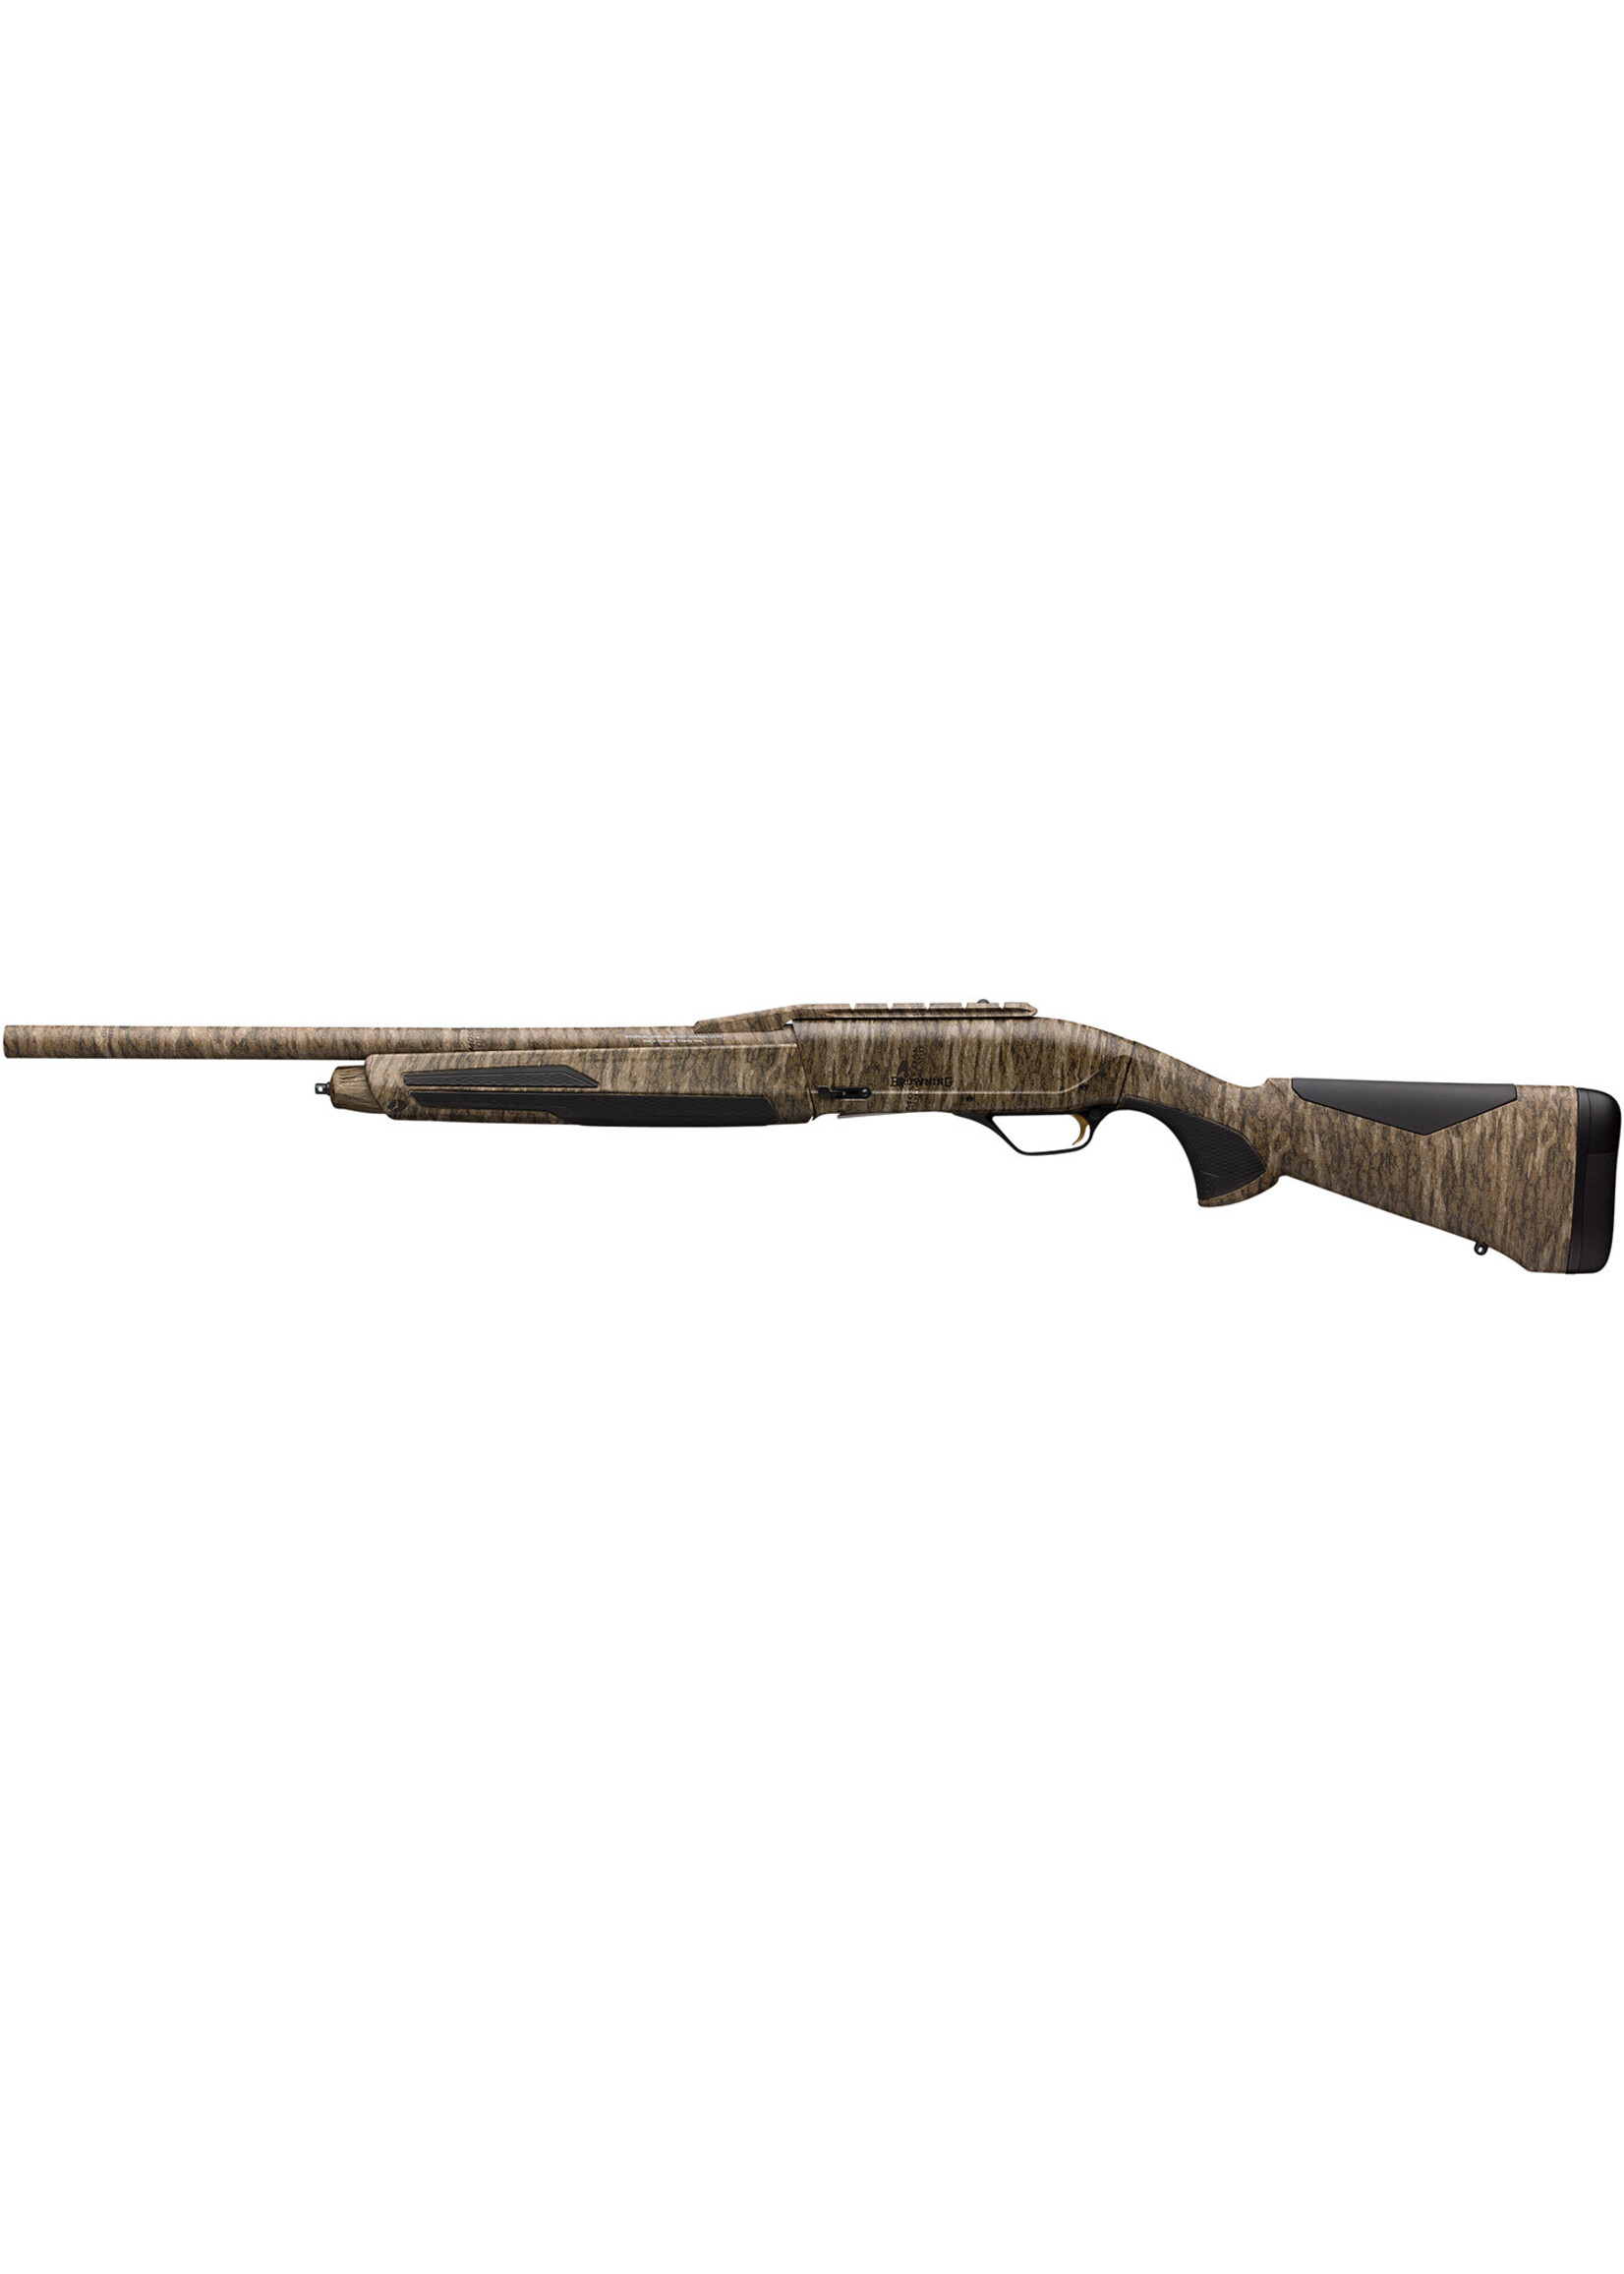 Browning Browning 011745321 Maxus II Rifled Deer 12 Gauge 3" 4+1 22" Fully Rifled Barrel, Mossy Oak Bottomland, Synthetic Furniture with Overmolded Grip Panels, Weaver Style Scope Mount